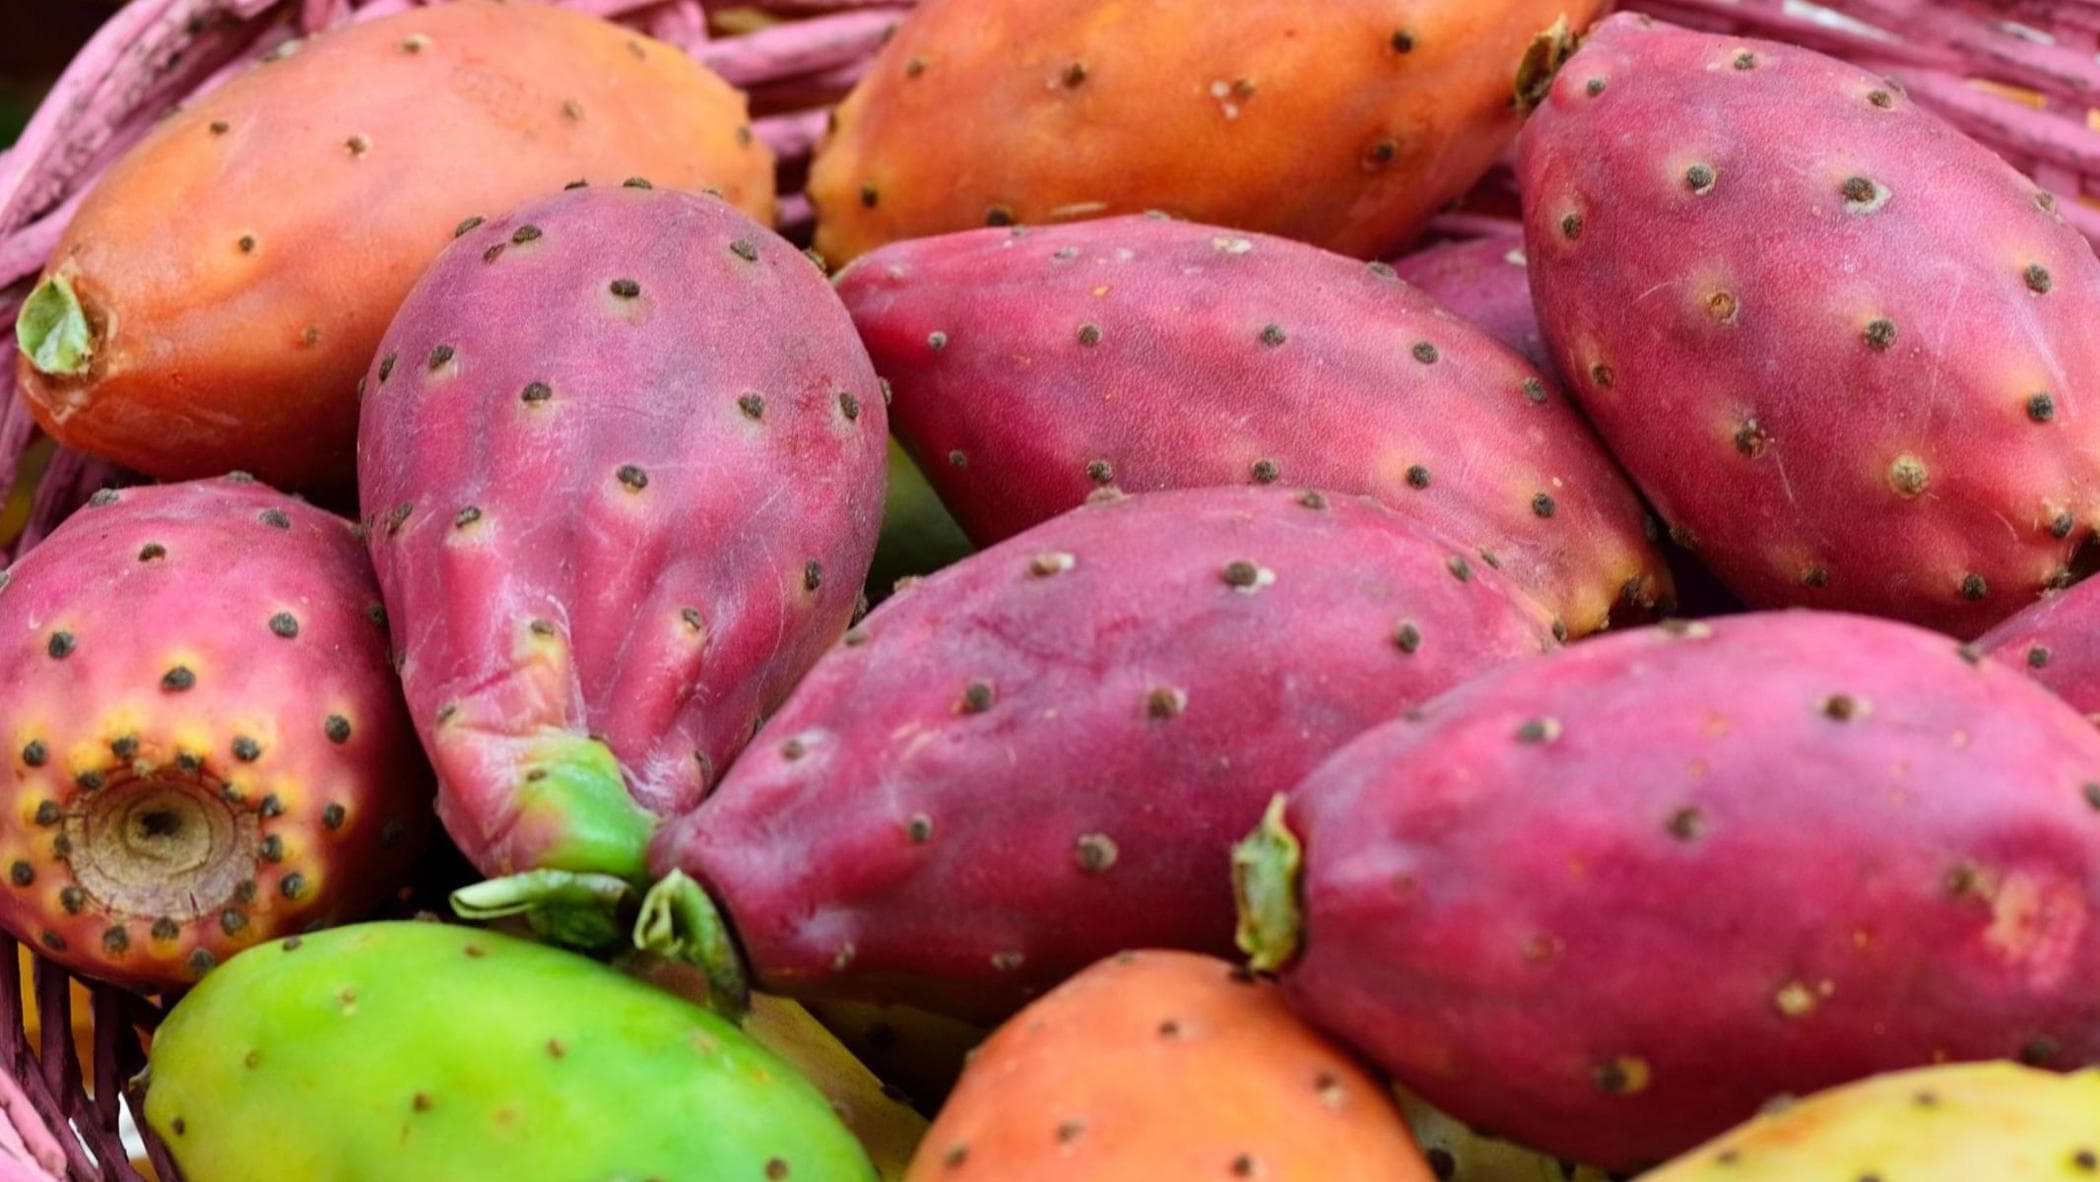 Etna PDO Prickly pear: a consortium for protection and promotion was born